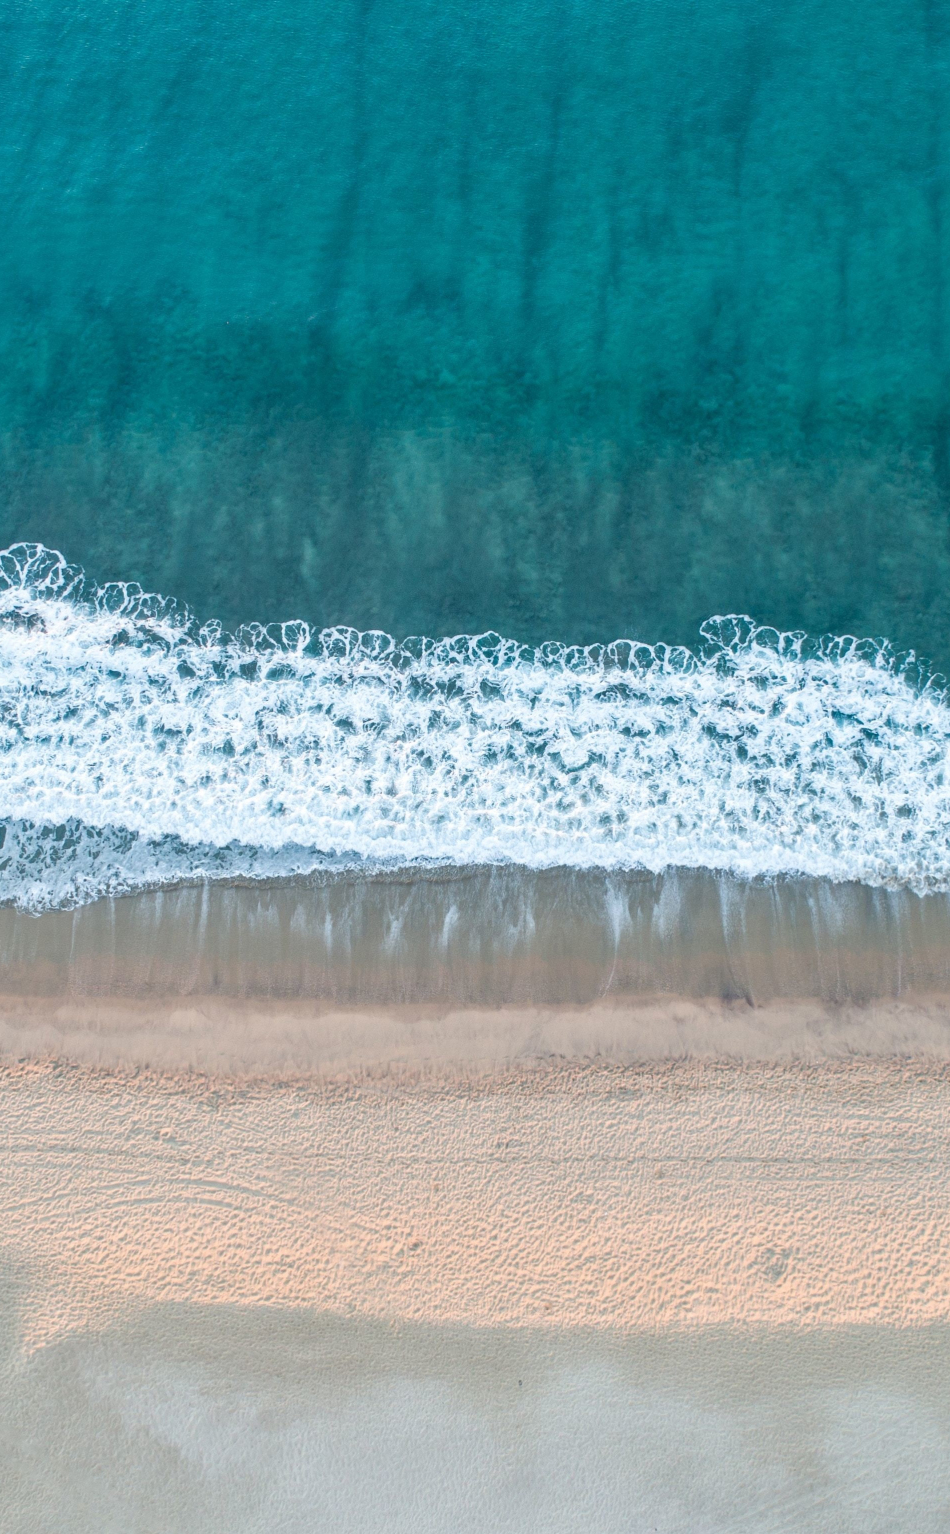 Download wallpaper 950x1534 calm and relaxed, beach, sea waves, iphone ...